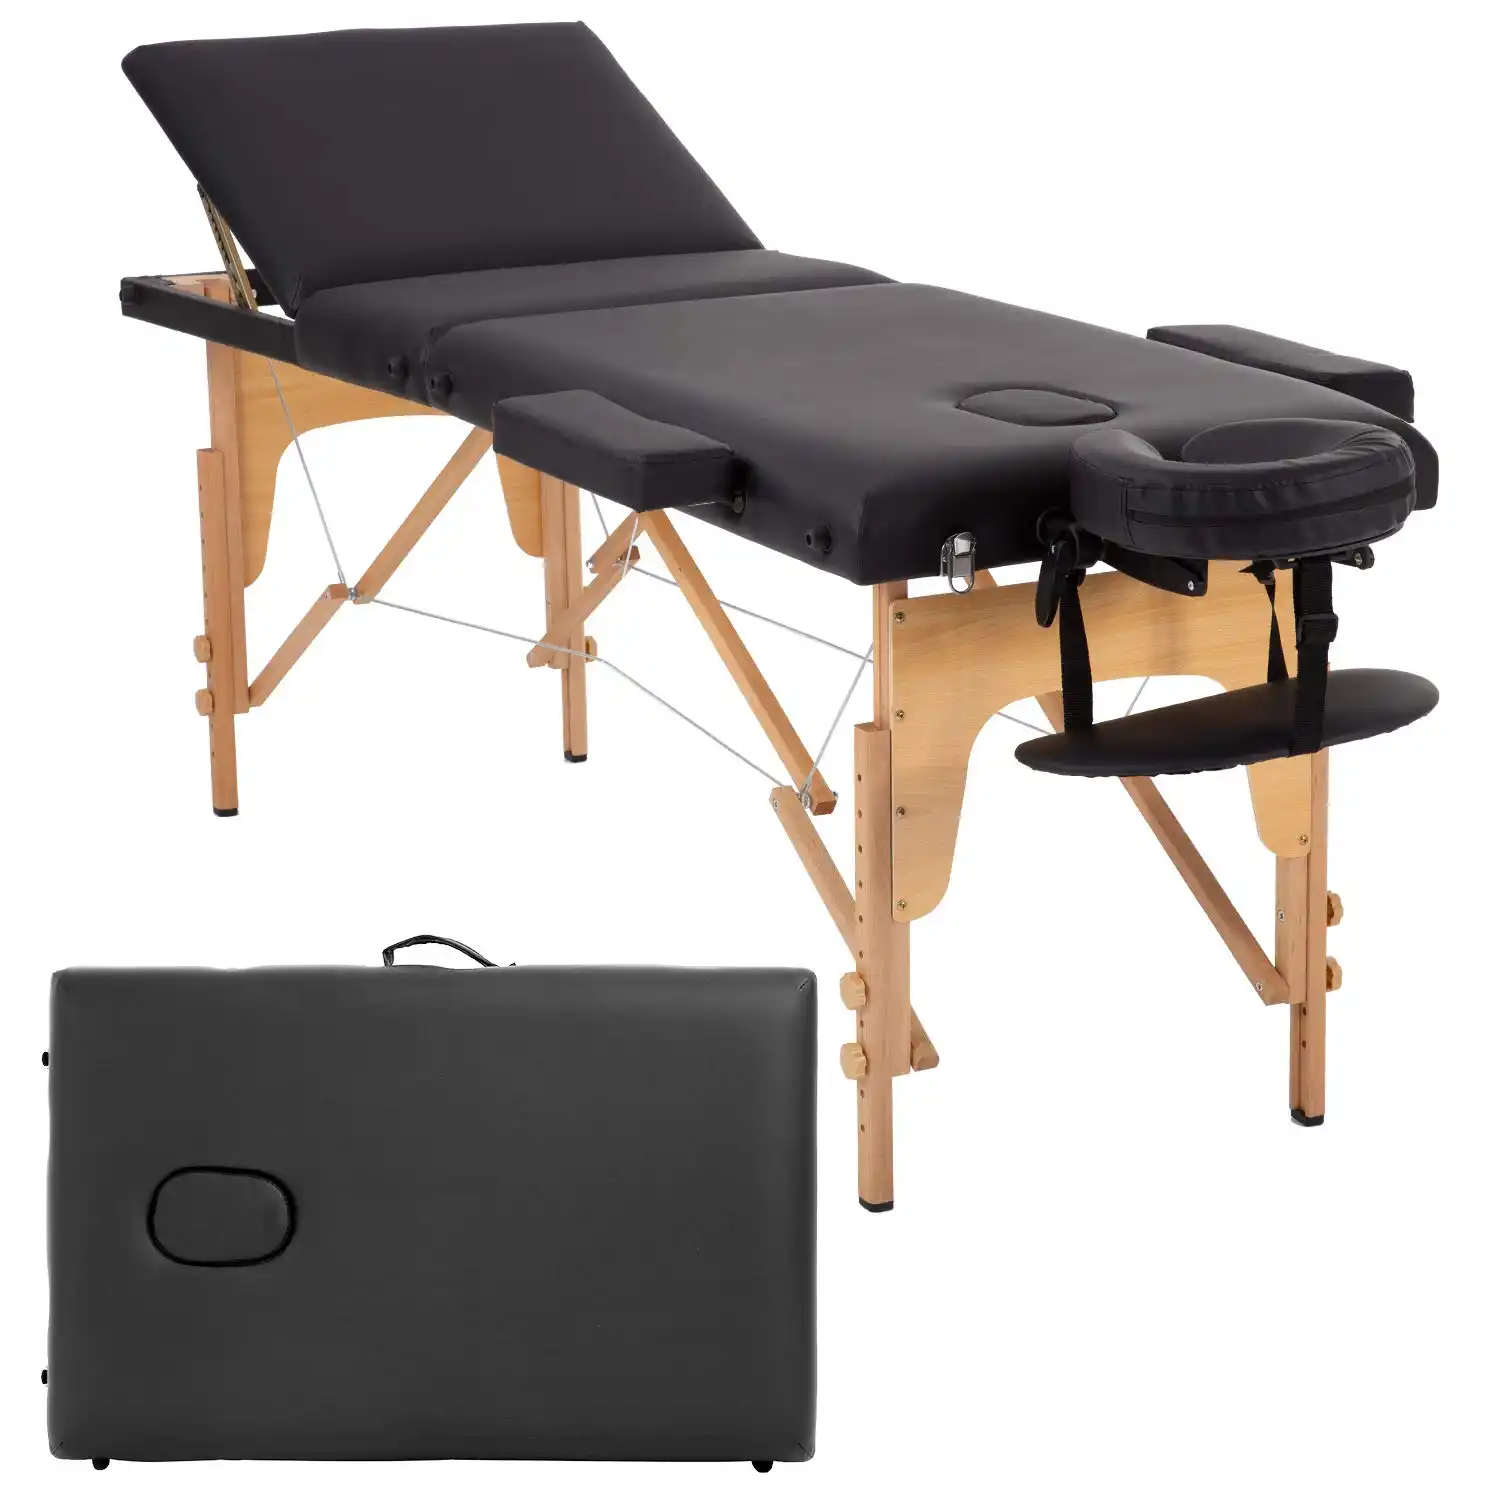 Best quality 3 section portable beech wooden massage table CHEAP SALE